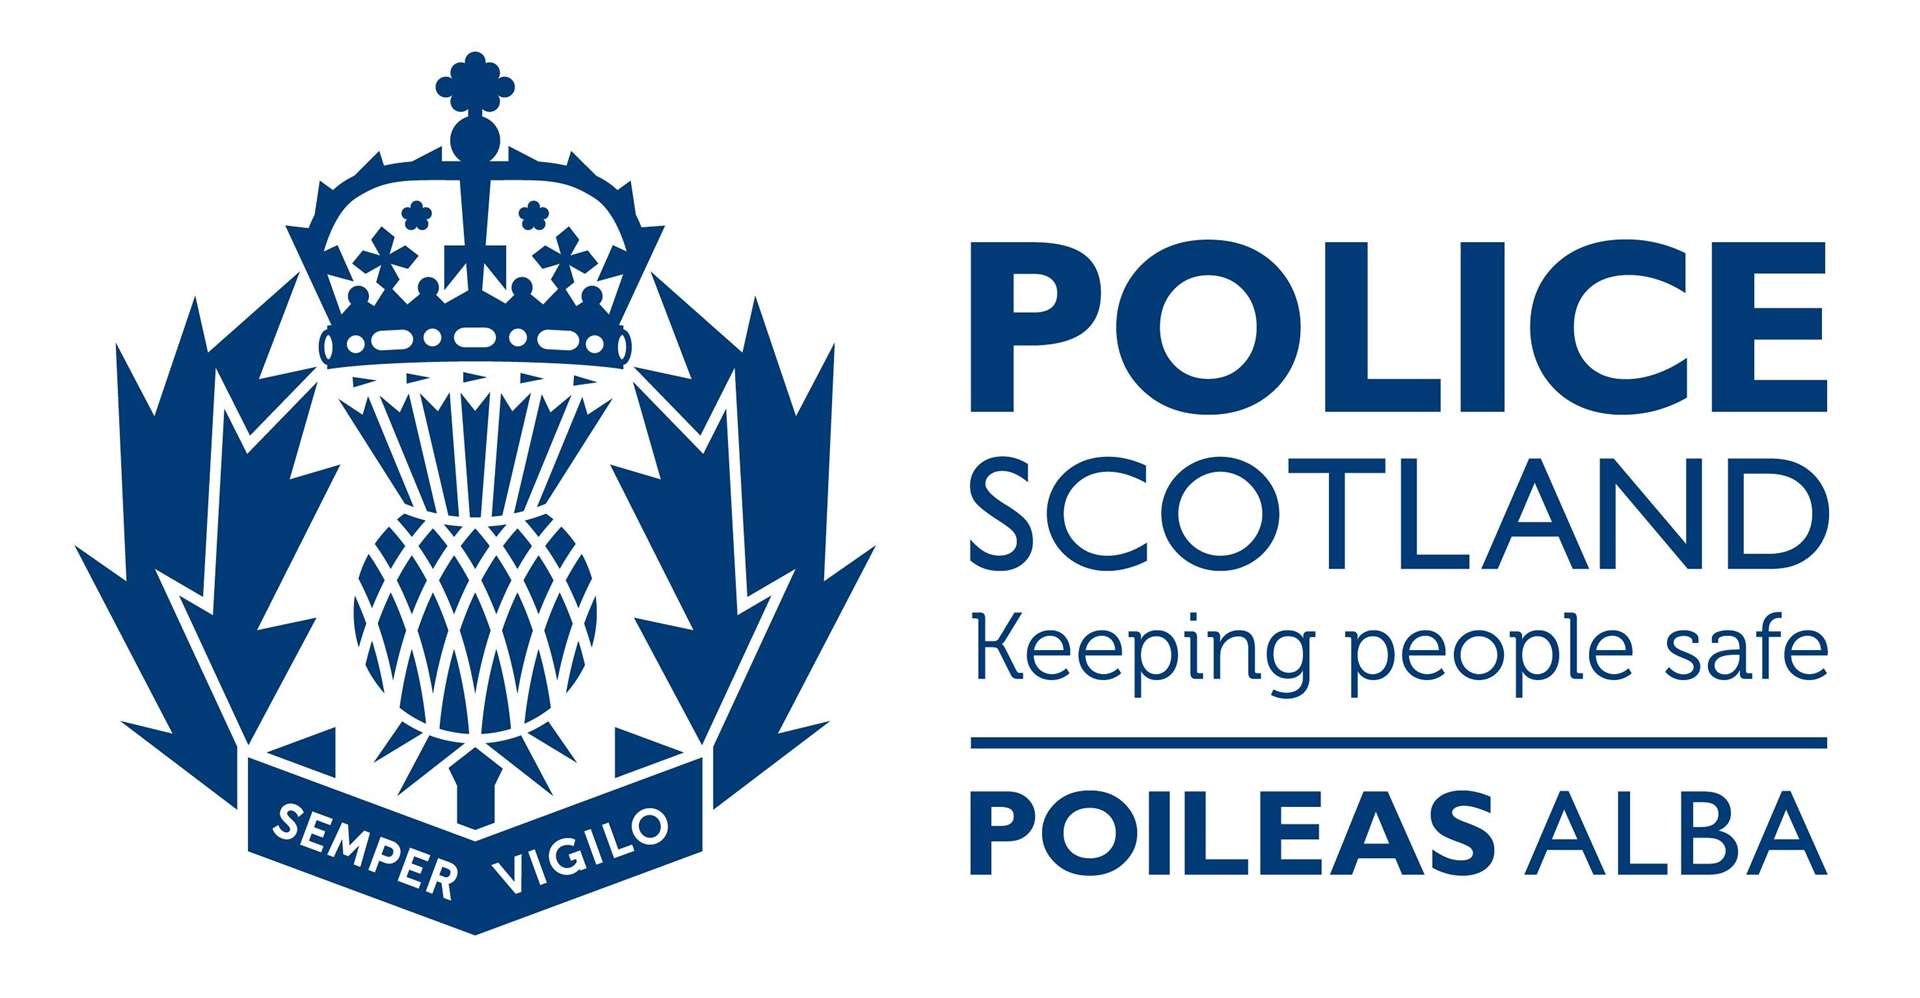 Police are following up on the incident that happened on Saturday evening.